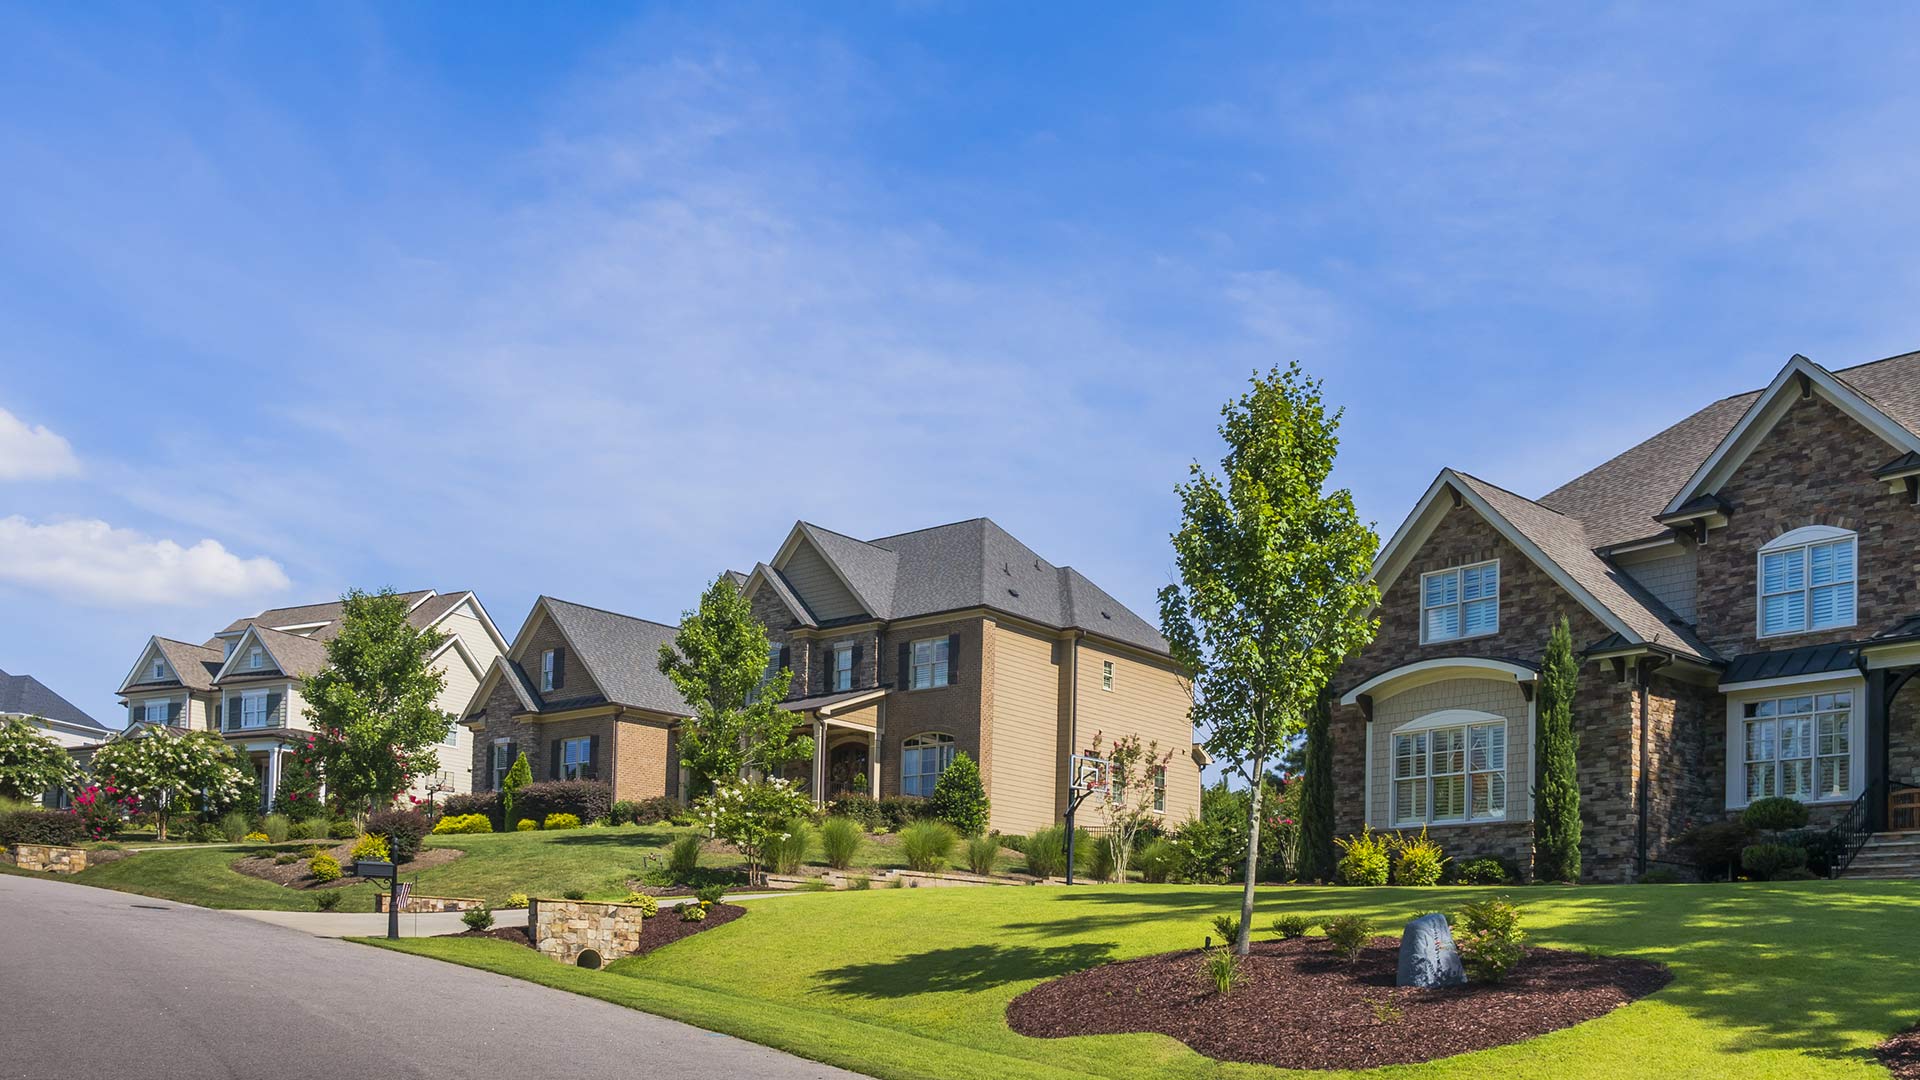 A sprawling neighborhood with vibrant lawns and beautiful landscaping in Willoughby, OH.